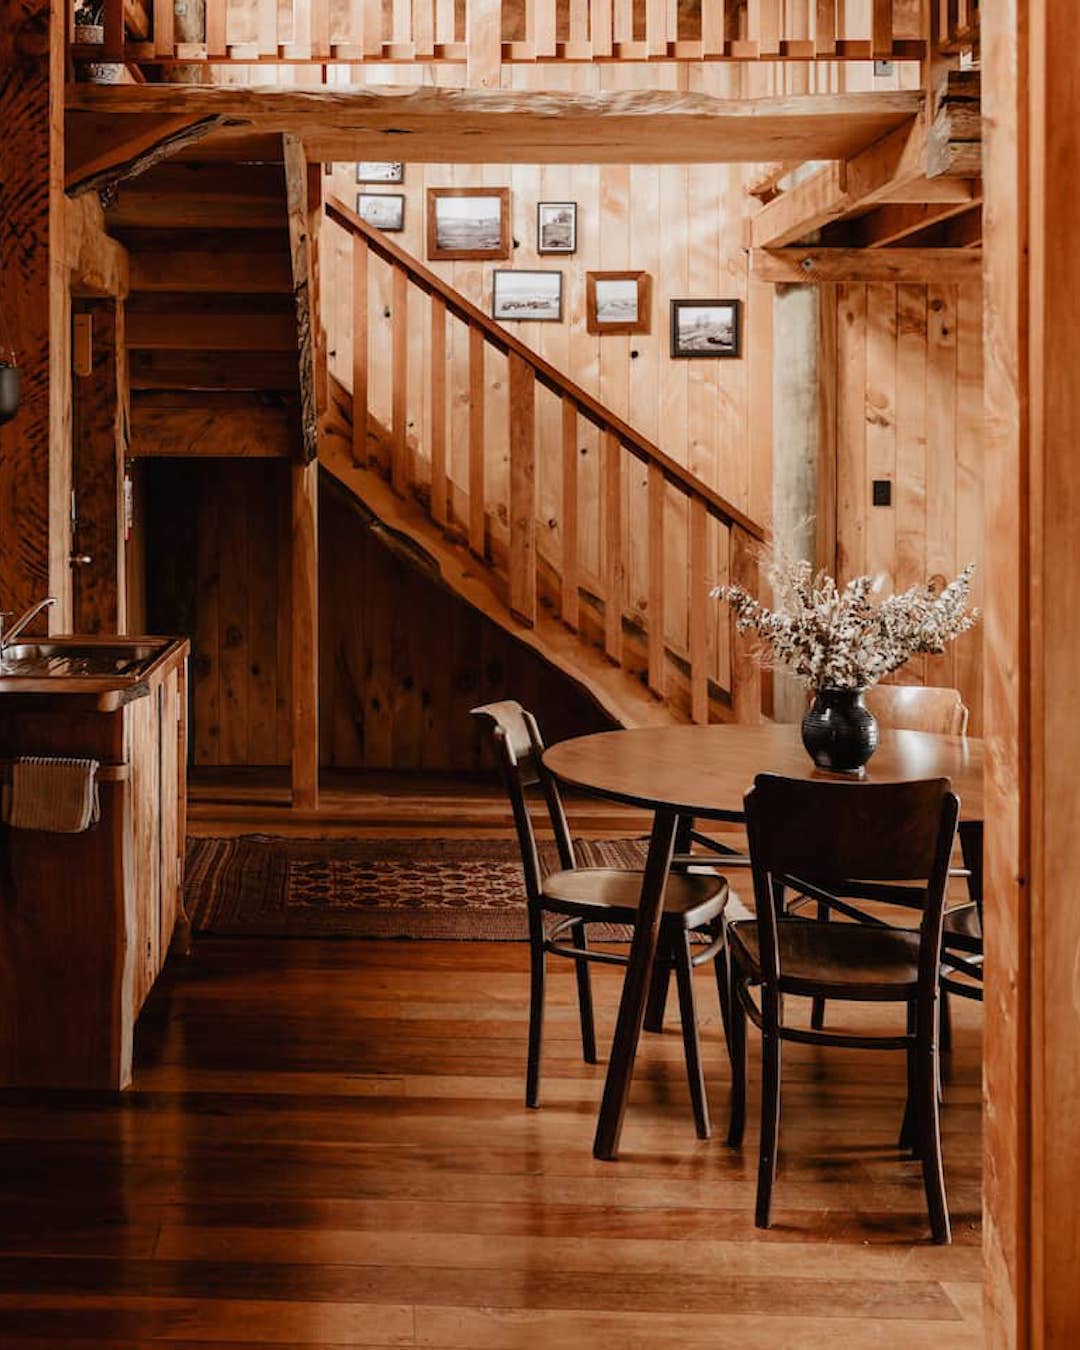 A wood-paneled cabin interior with rustic decor